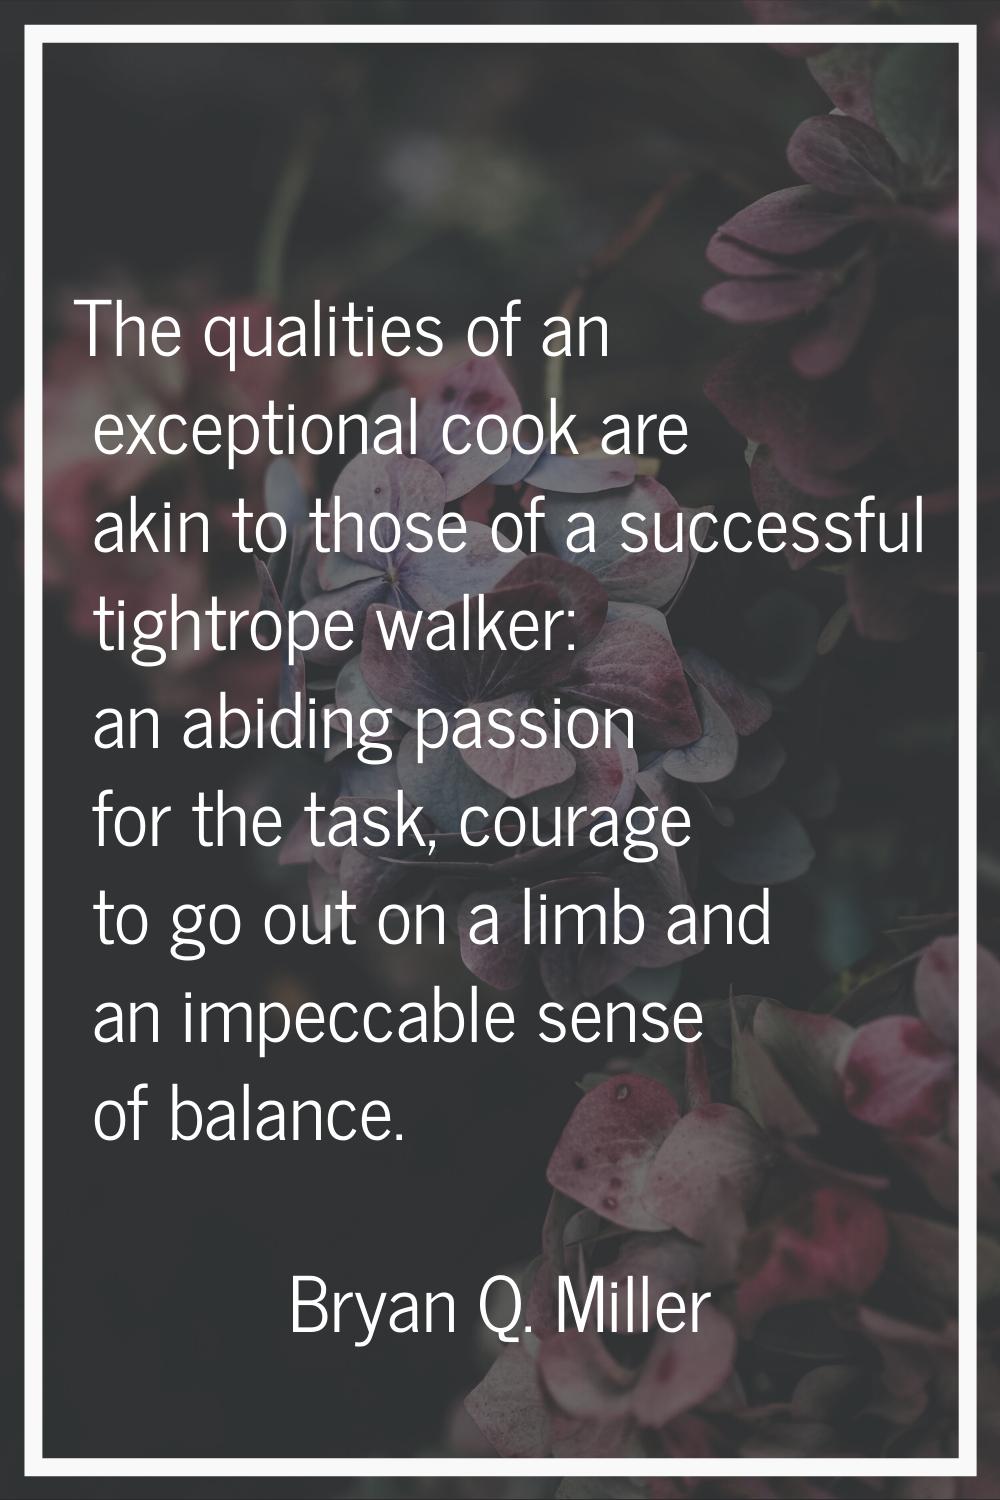 The qualities of an exceptional cook are akin to those of a successful tightrope walker: an abiding